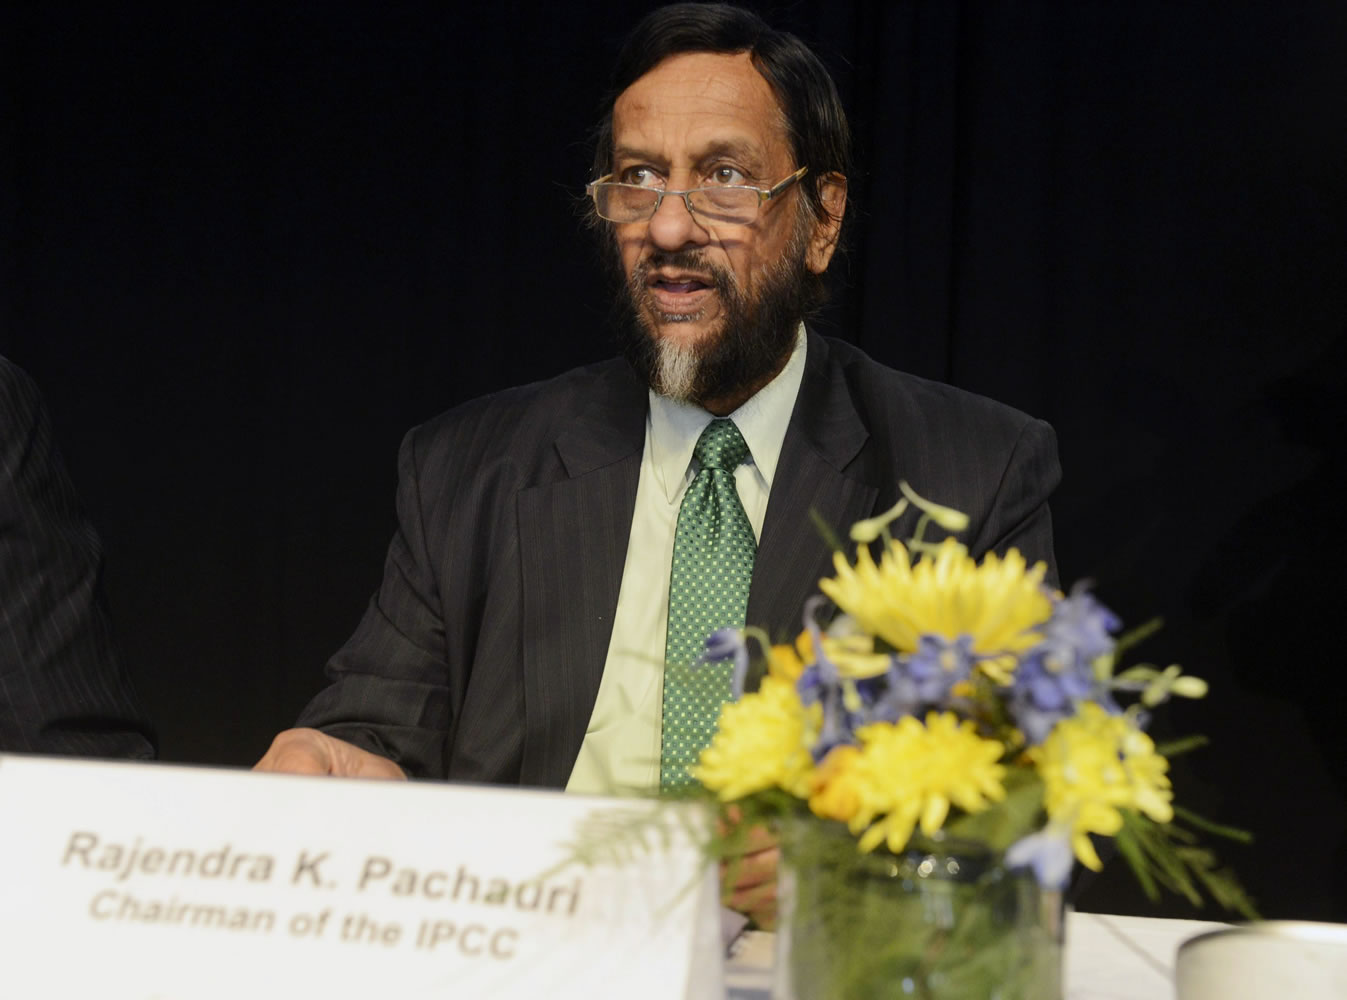 Rajendra Pachauri, the head of the U.N. Intergovernmental Panel on Climate Change (IPCC), during the presentation of the U.N. IPCC climate report, in Stockholm,  Friday Sep. 27, 2013. Scientists can now say with extreme confidence that human activity is the dominant cause of the global warming observed since the 1950s, a new report by an international scientific group said Friday. Calling man-made warming &quot;extremely likely,&quot; the Intergovernmental Panel on Climate Change used the strongest words yet on the issue as it adopted its assessment on the state of the climate system.